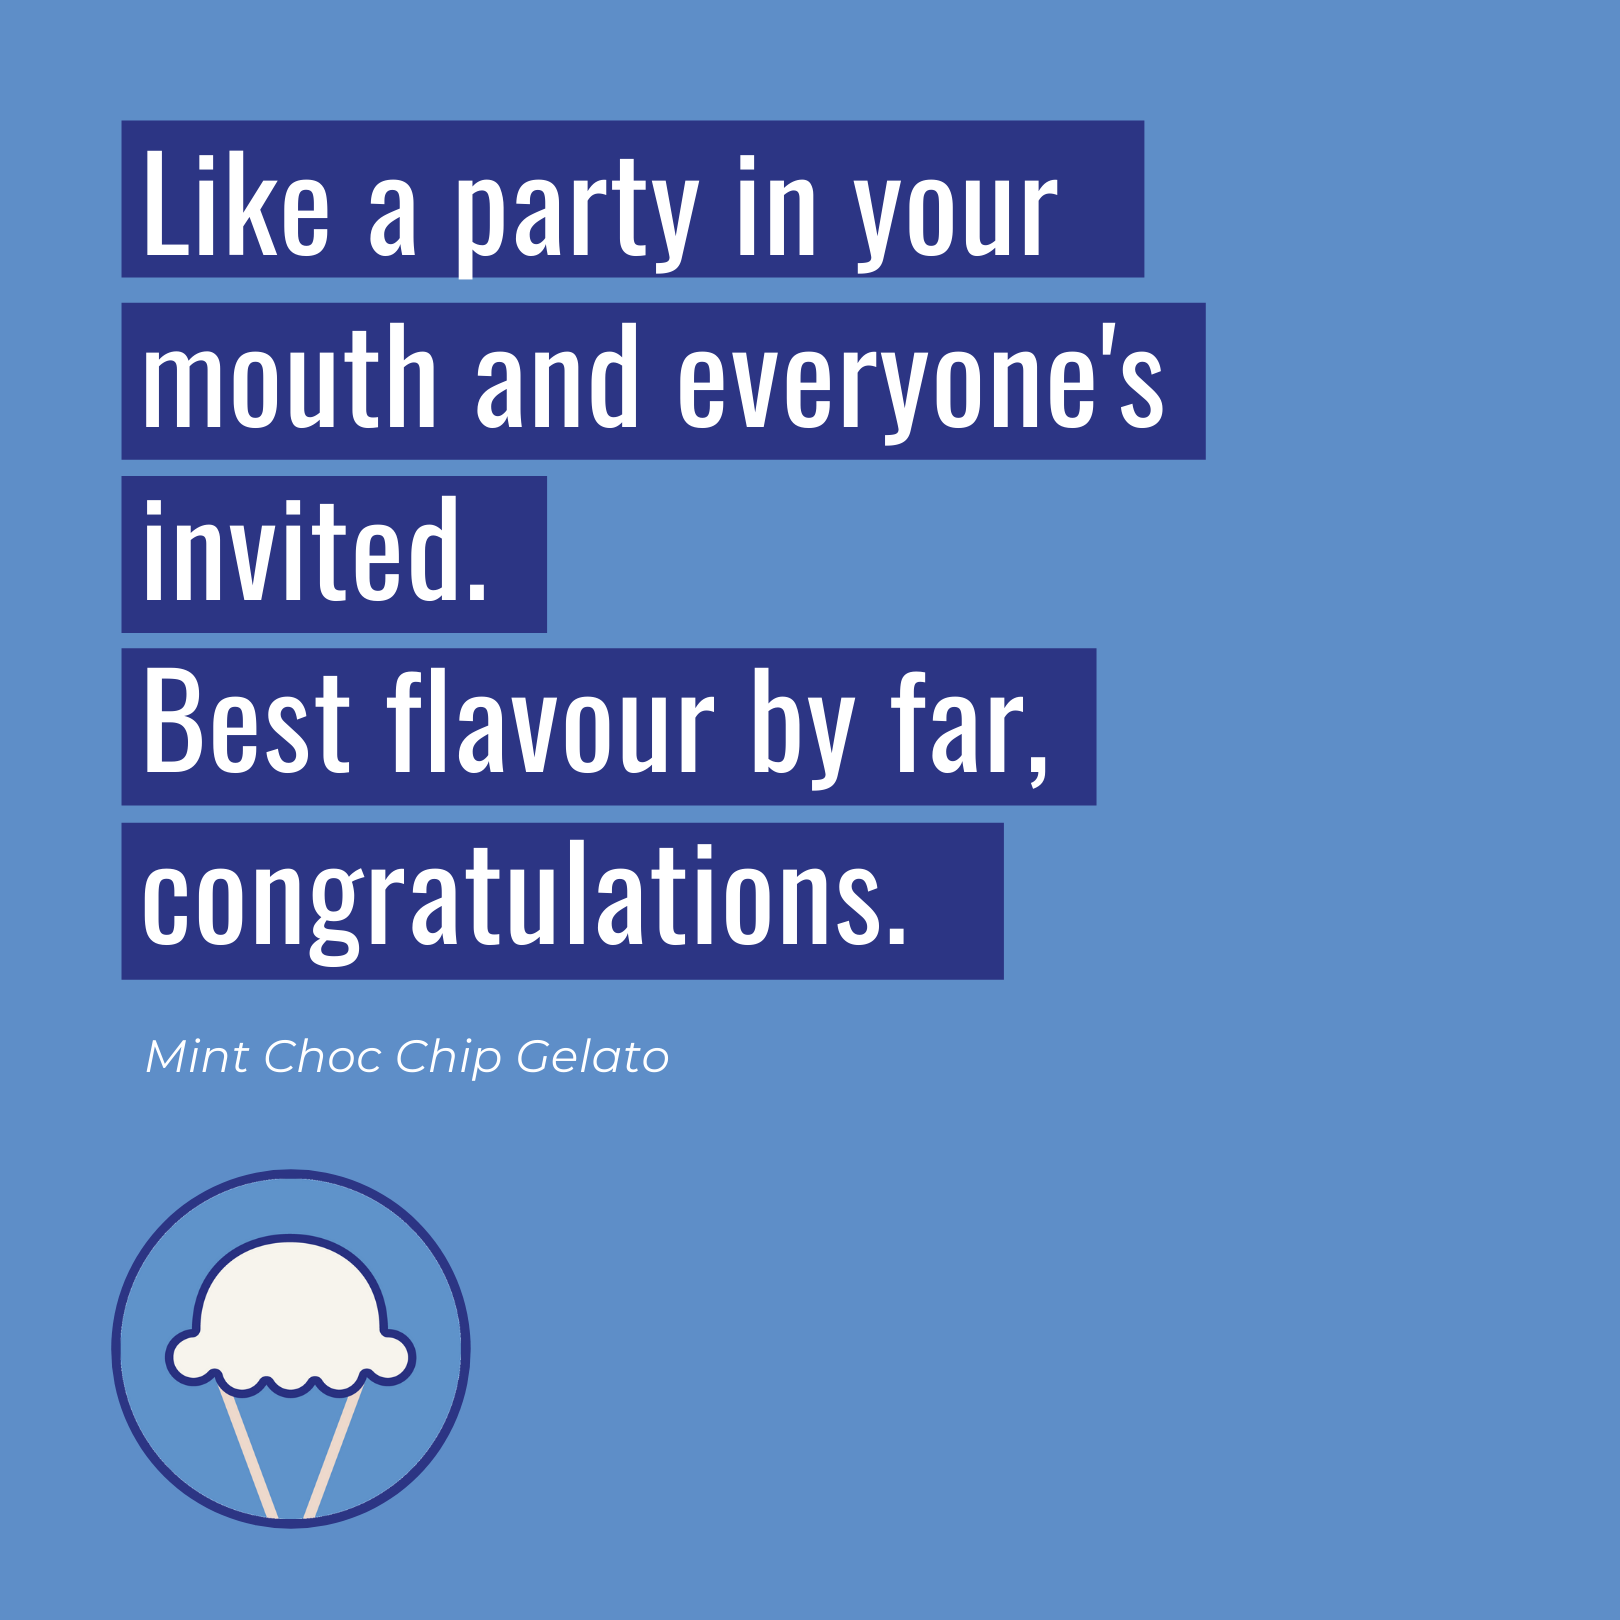 Little Sky Gelato like a party in your mouth quote reviews.png